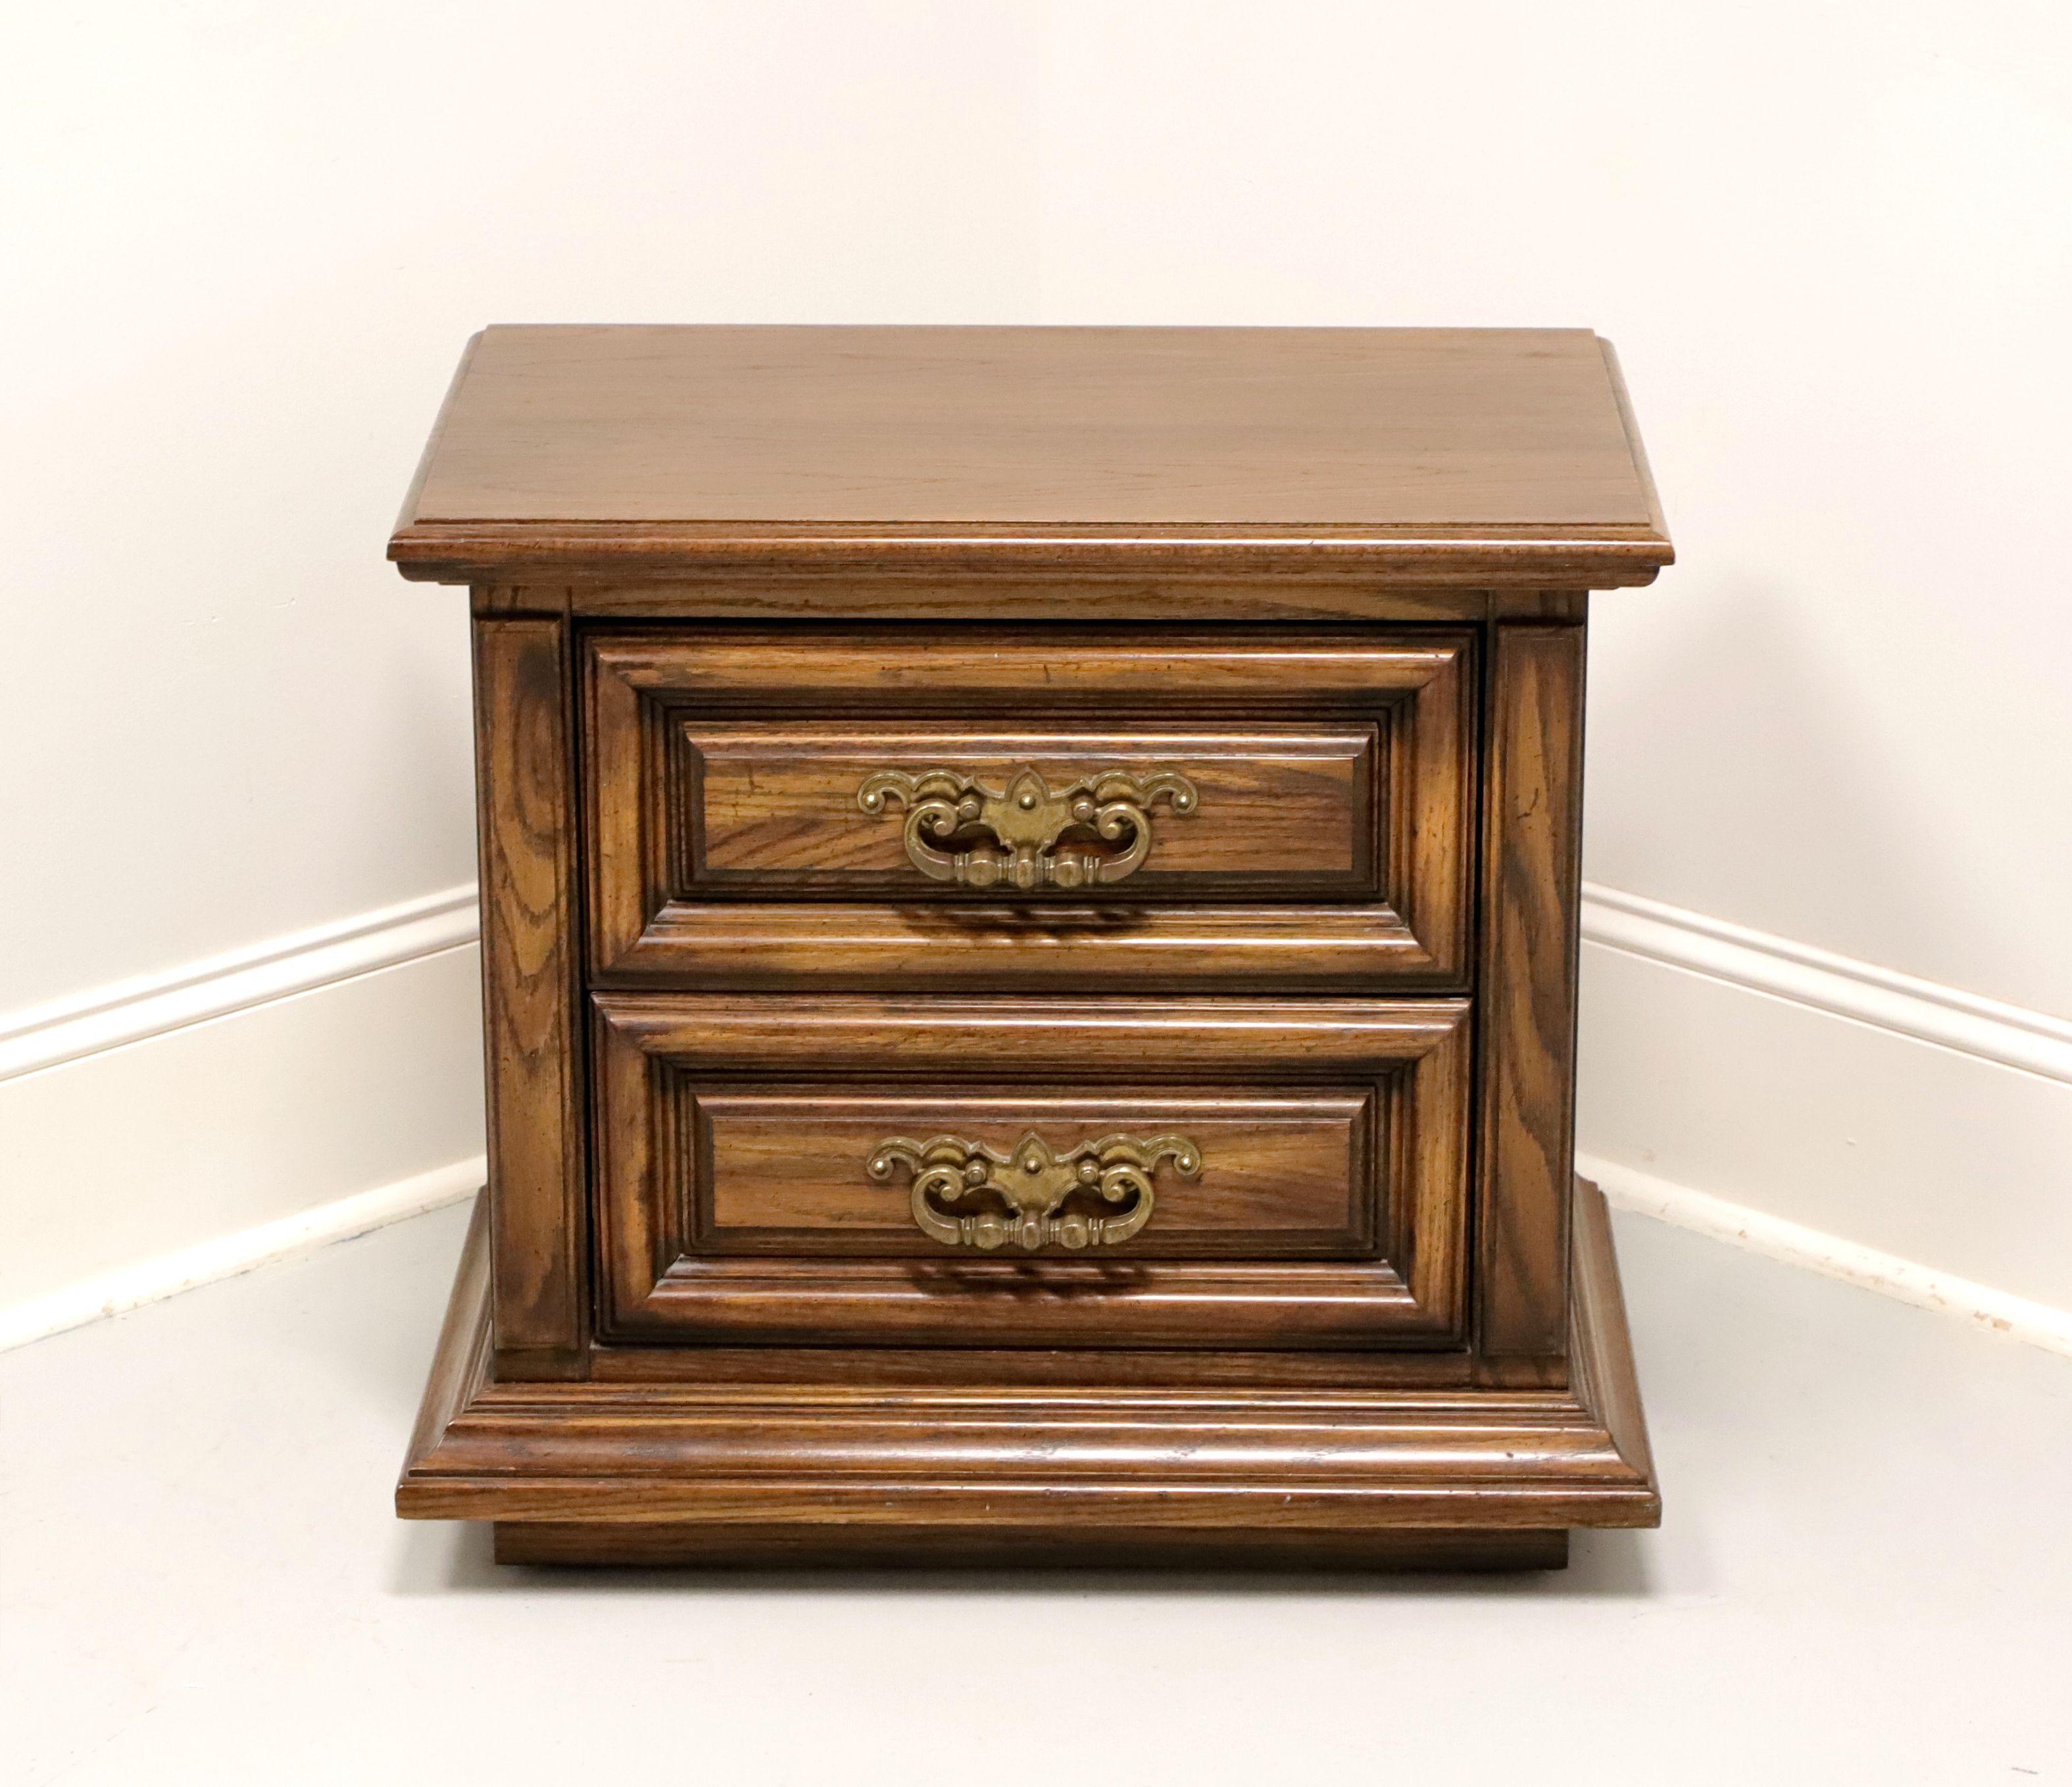 A Spanish Mediterranean style nightstand by Thomasville, from their Segovia Collection. Solid oak with slightly distressed finish, bevel edge top, brass hardware, raised drawer fronts, and a solid base. Features two drawers of dovetail construction.